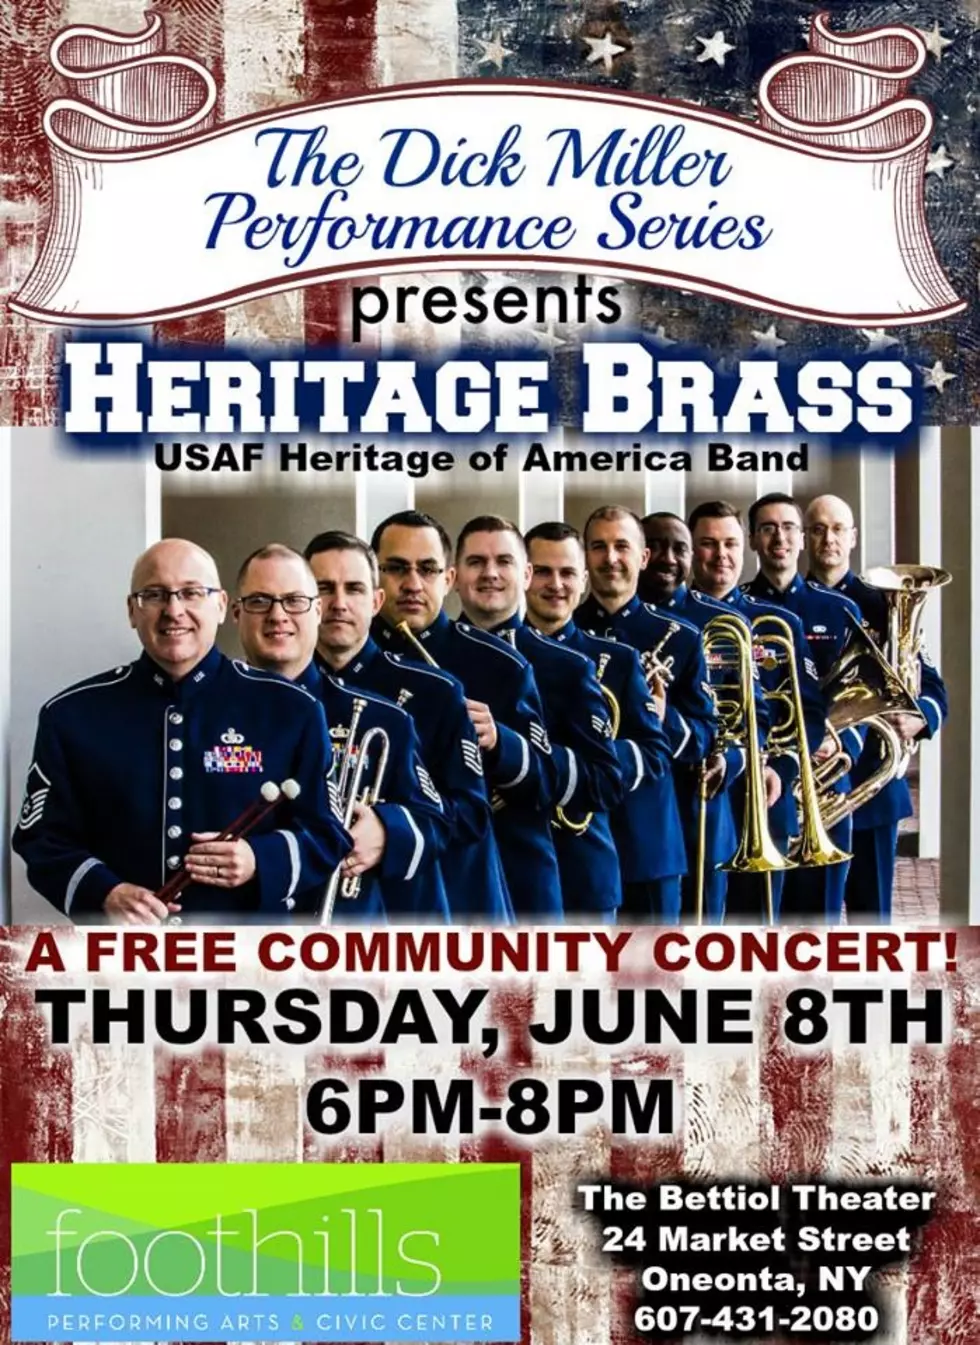 Foothills Presents a Free Community Concert!